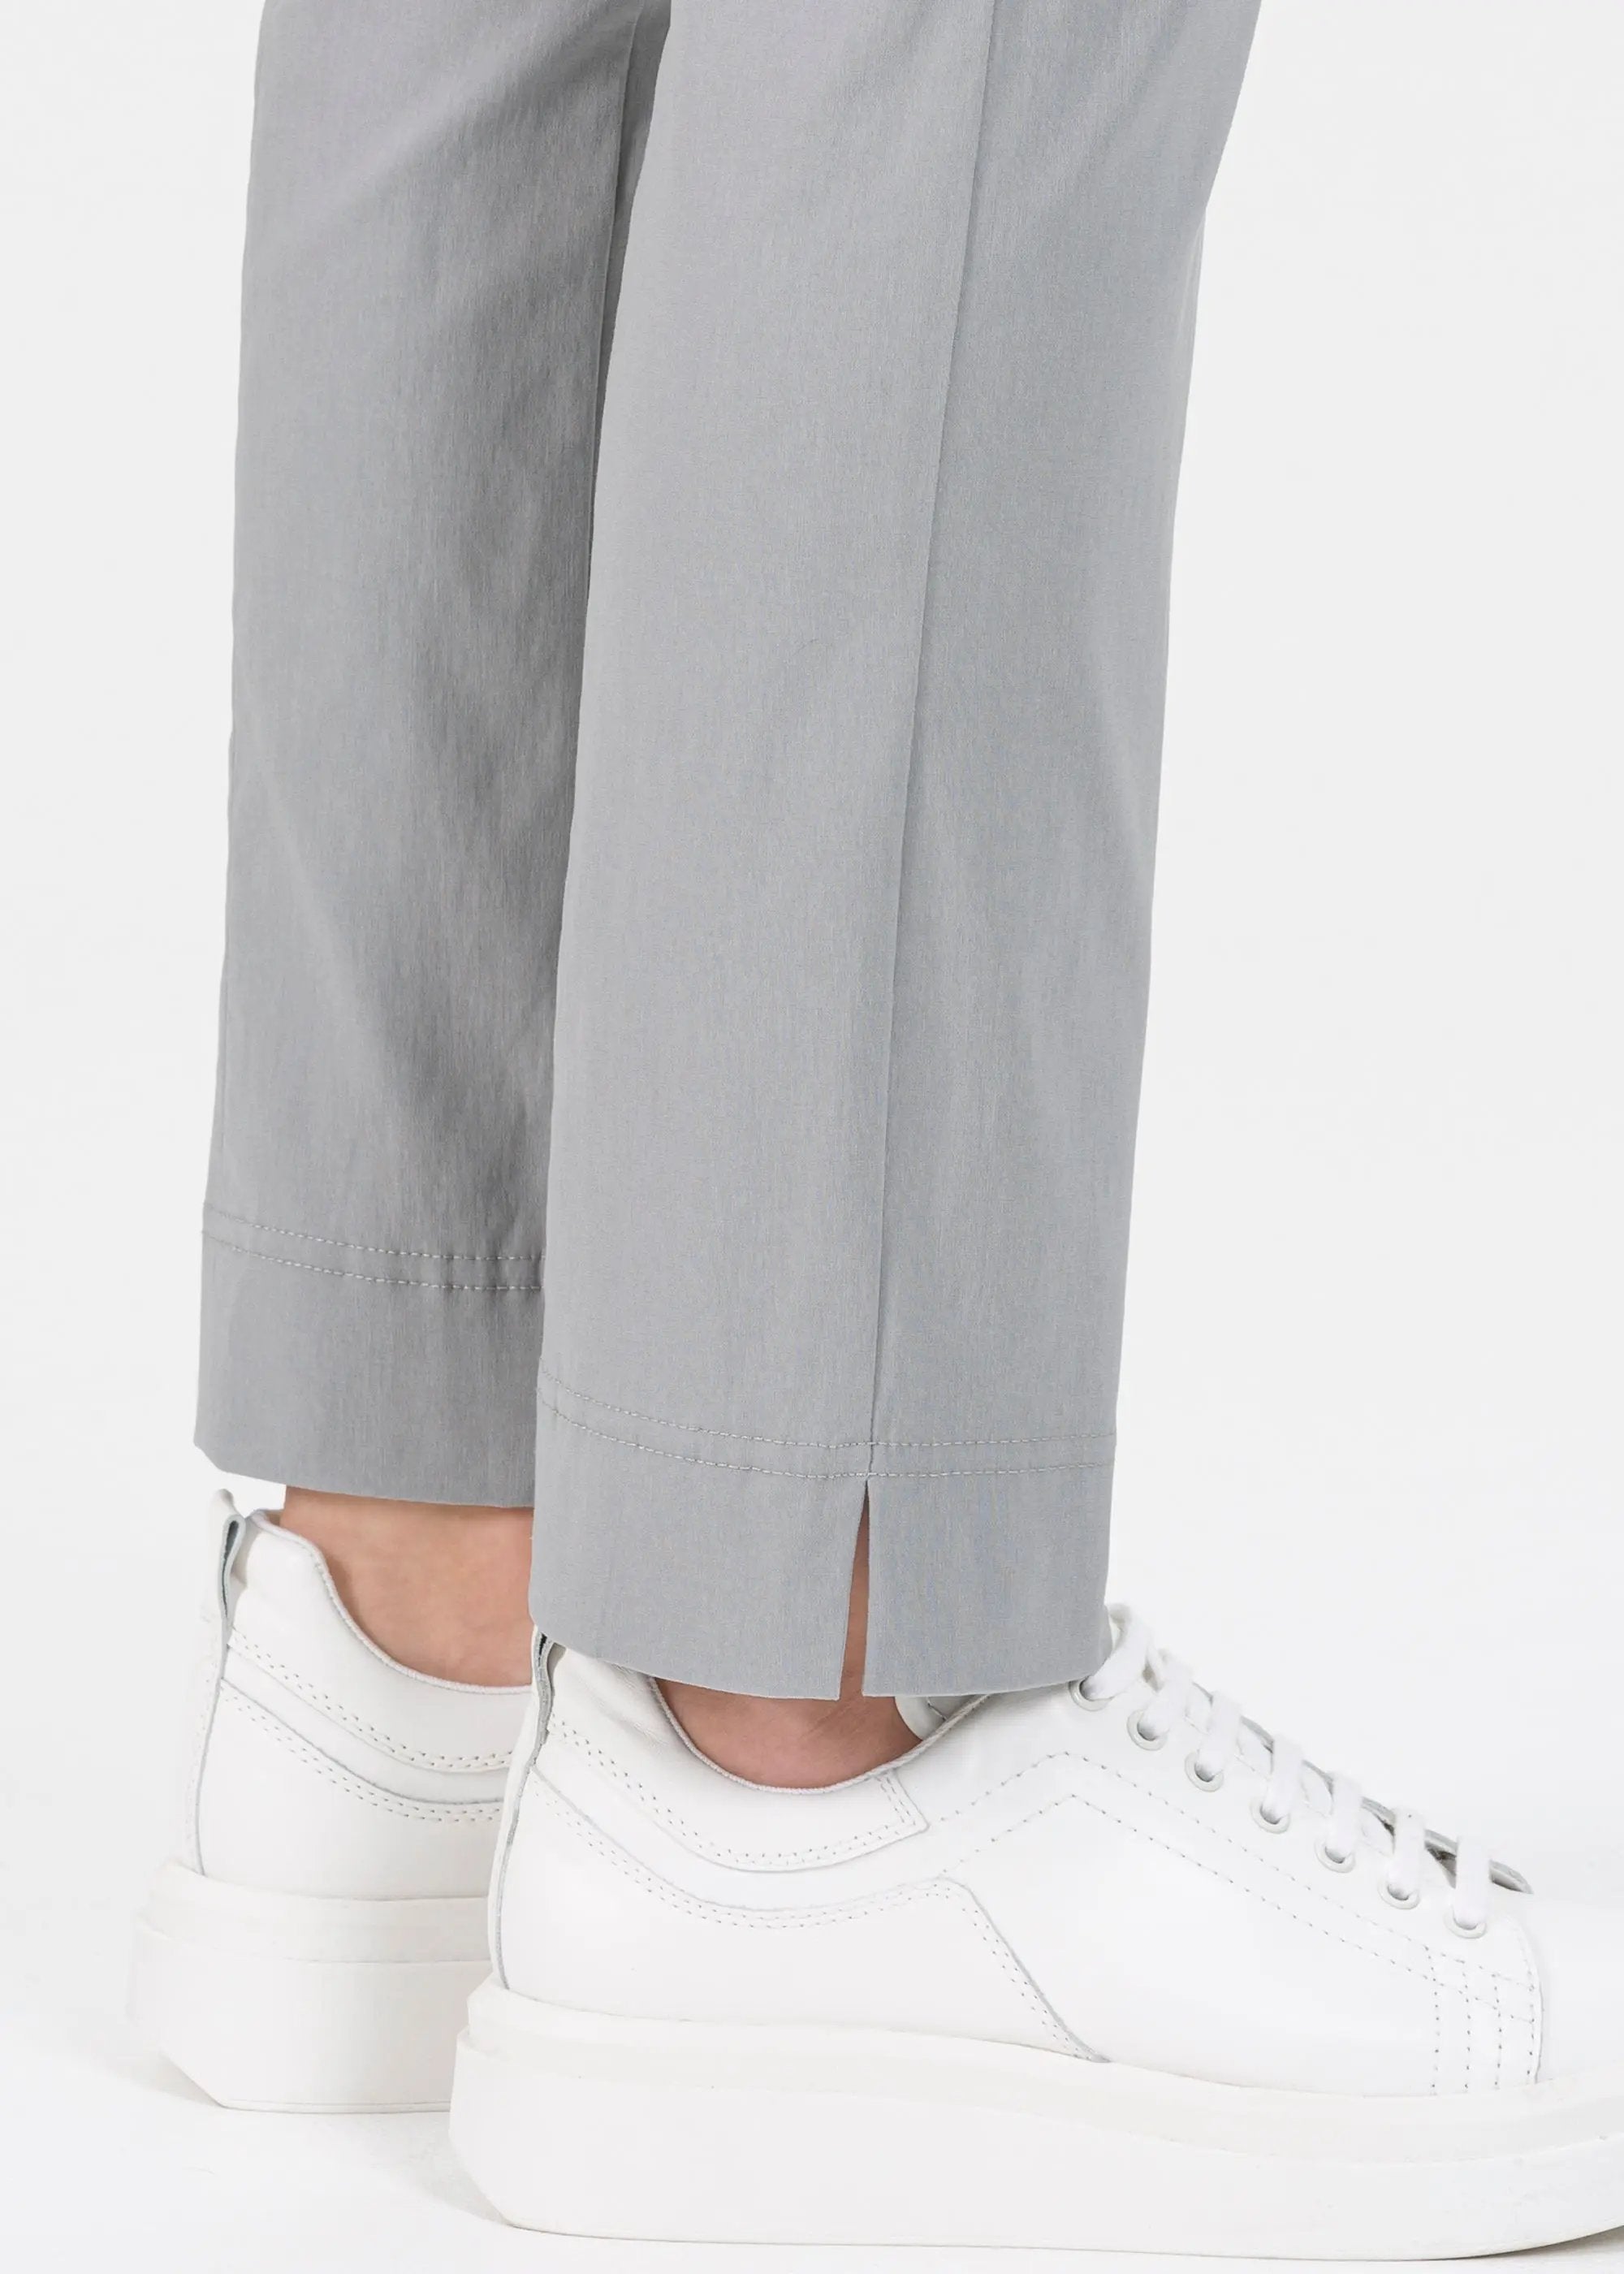 silver length stretch trousers in Ina ankle